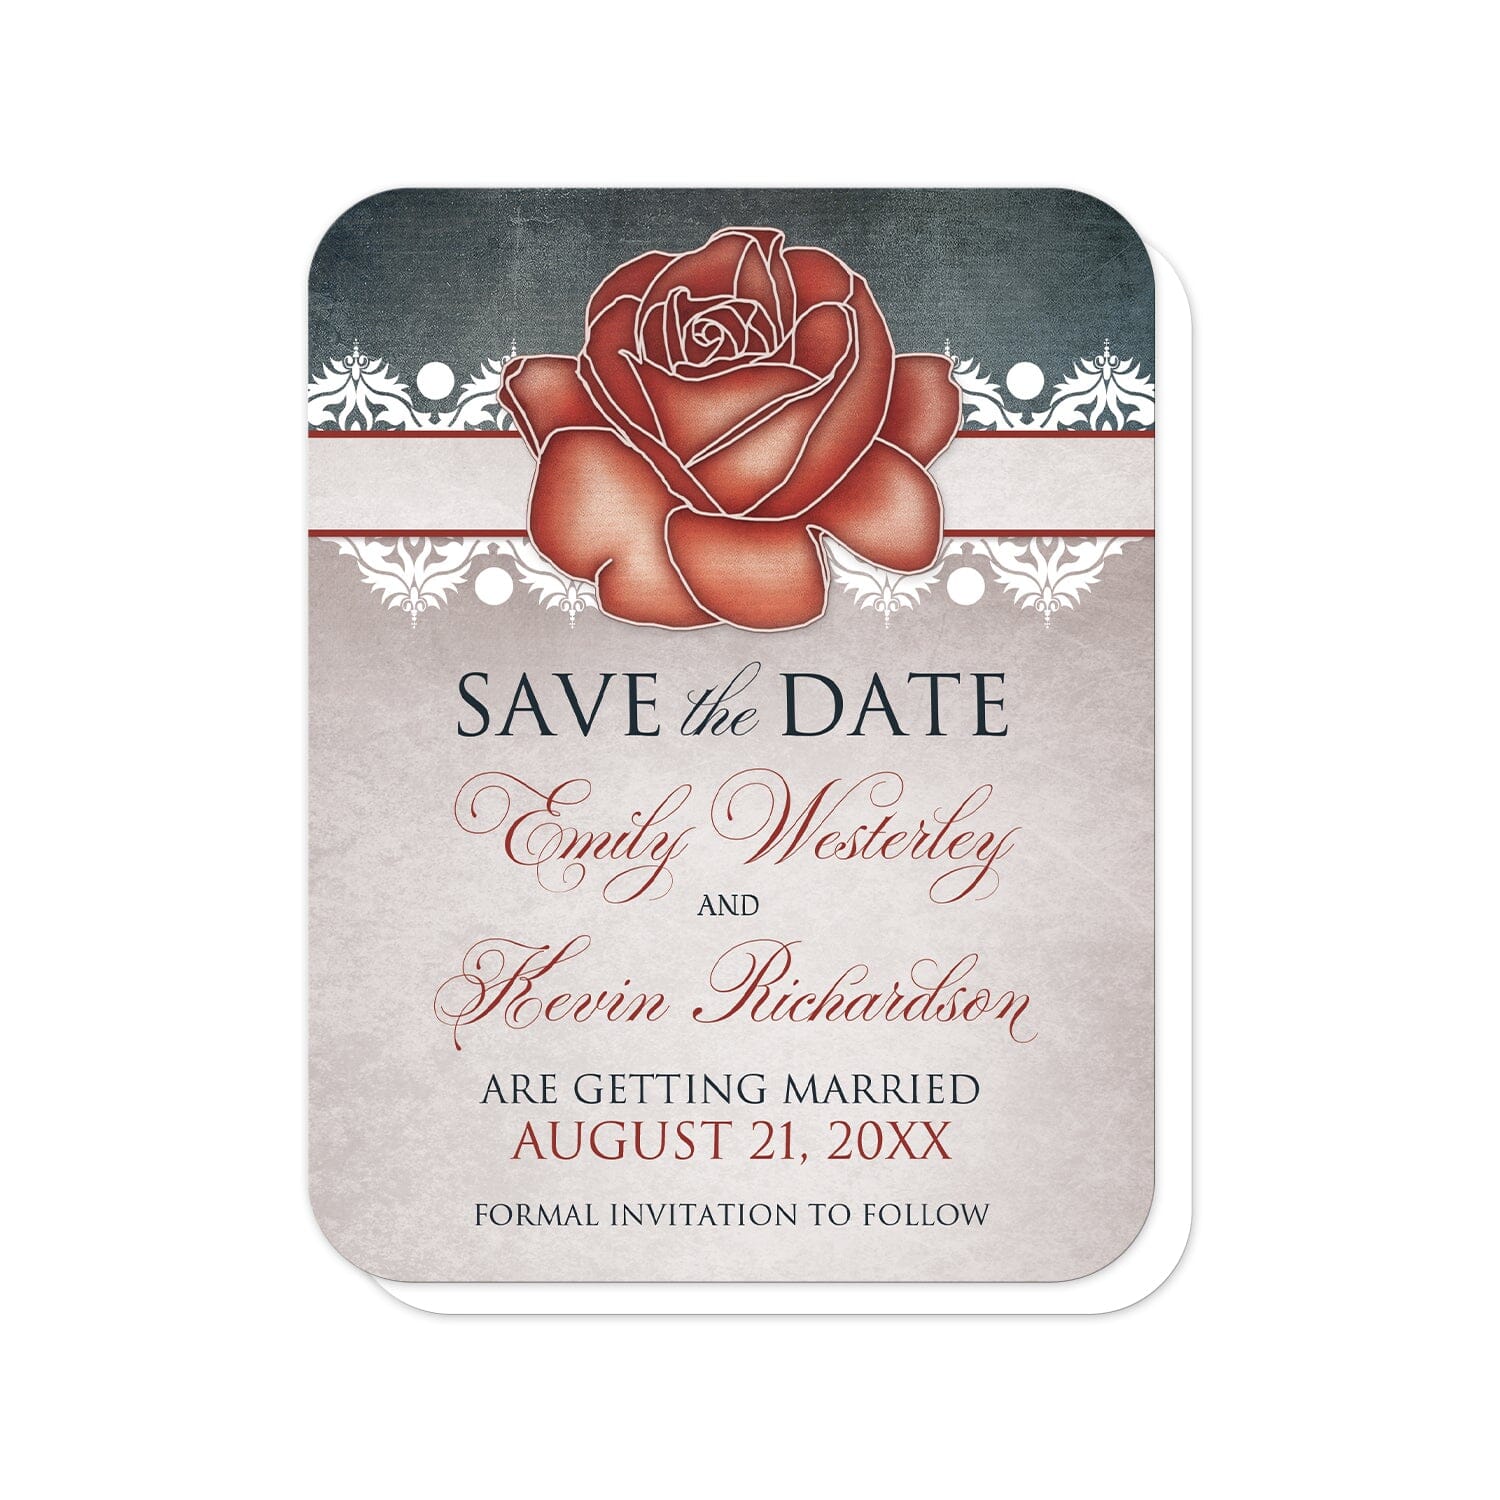 Rustic Country Rose Blue Save the Date Cards (with rounded corners) at Artistically Invited. Rustic country rose blue save the date cards designed with an eclectic mix of rustic, vintage, and modern elements. They feature an artistic red rose at the top over a stripe lined with white damask elements with a dark navy blue design at the top. Your personalized wedding date announcement details are custom printed in red and navy blue over a beige vintage parchment illustration below the rose.